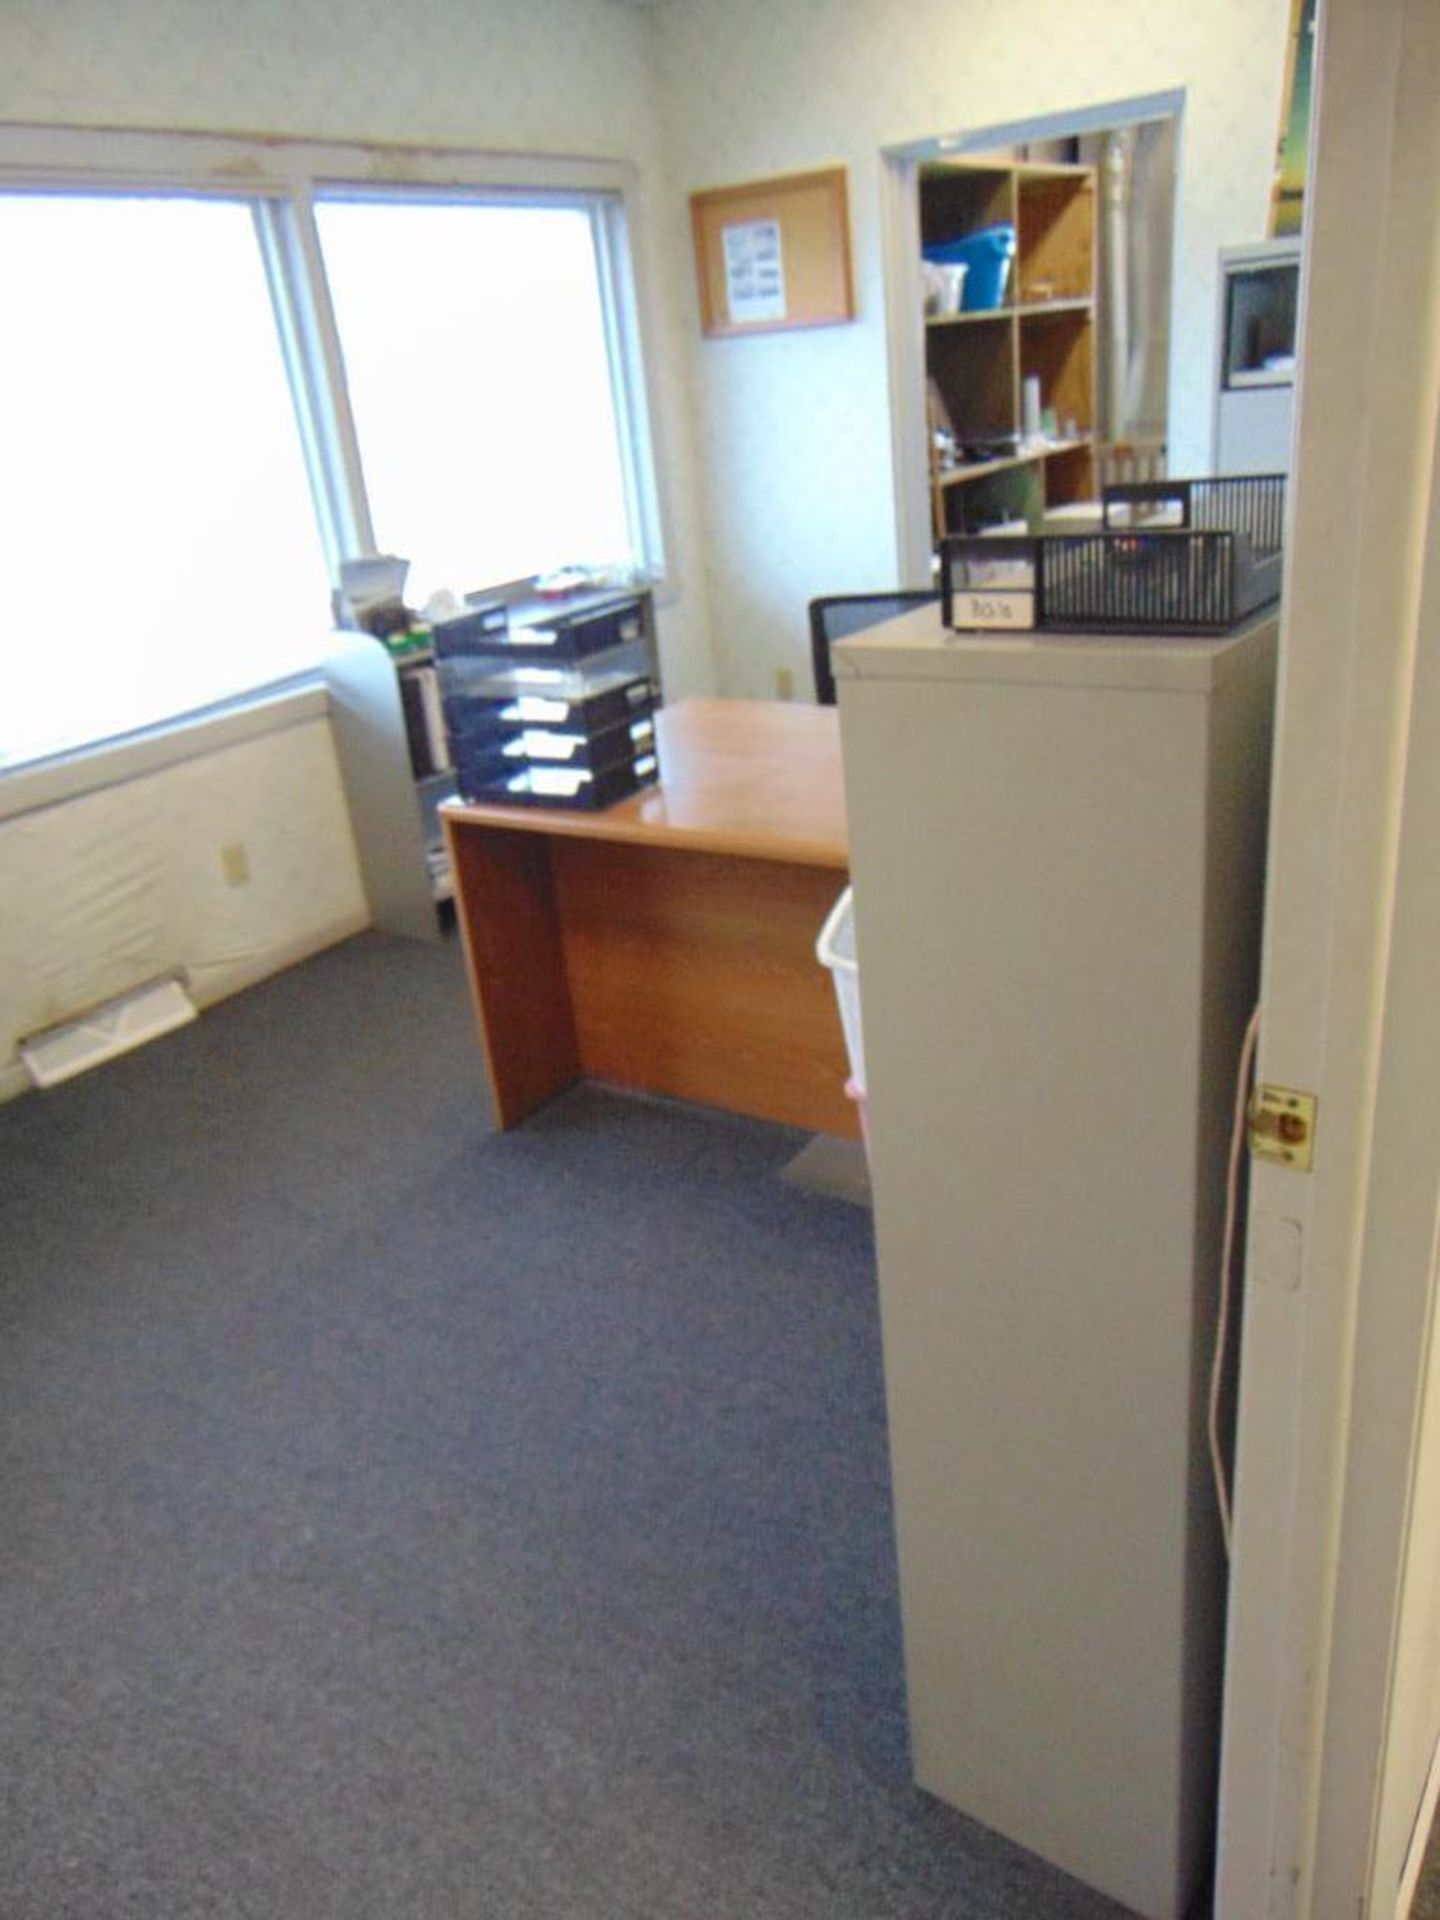 2 Corner Offices, Utility Room, and Contents*